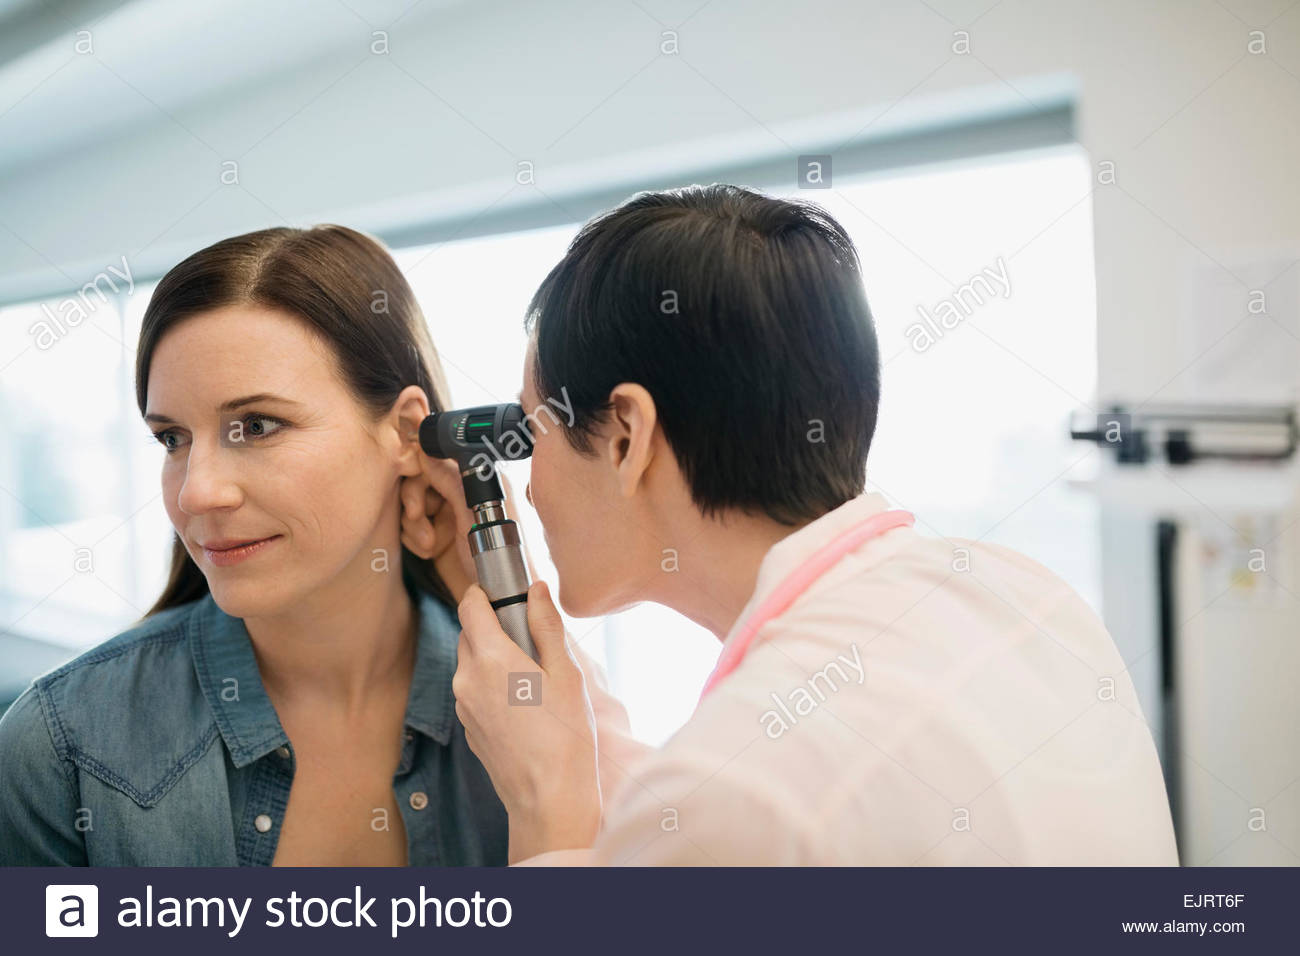 Doctor Checking Patients Ears With Otoscope Stock Photo Alamy